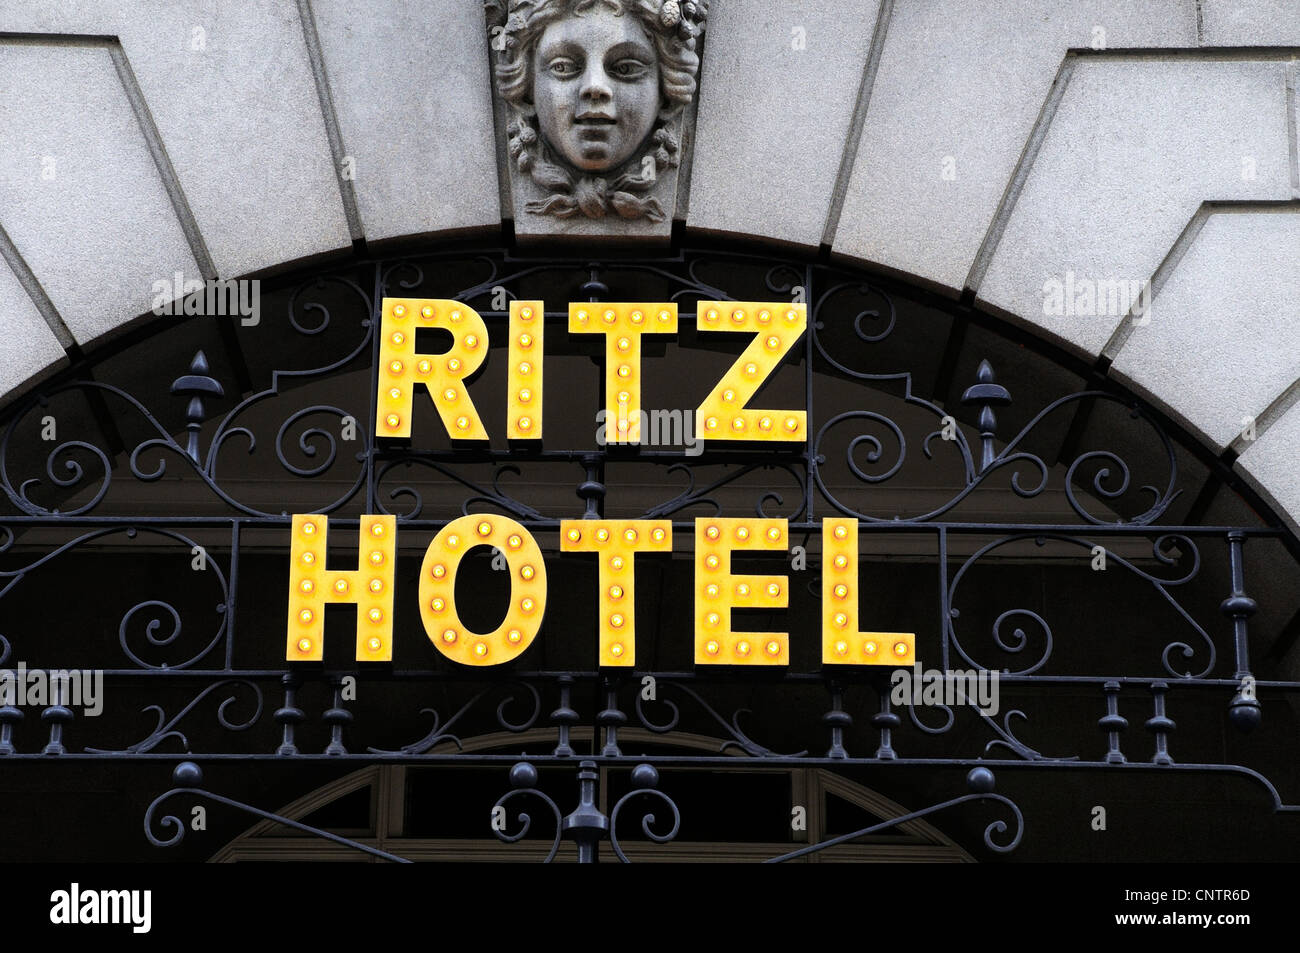 Exterior of The Ritz hotel Piccadilly, London Stock Photo